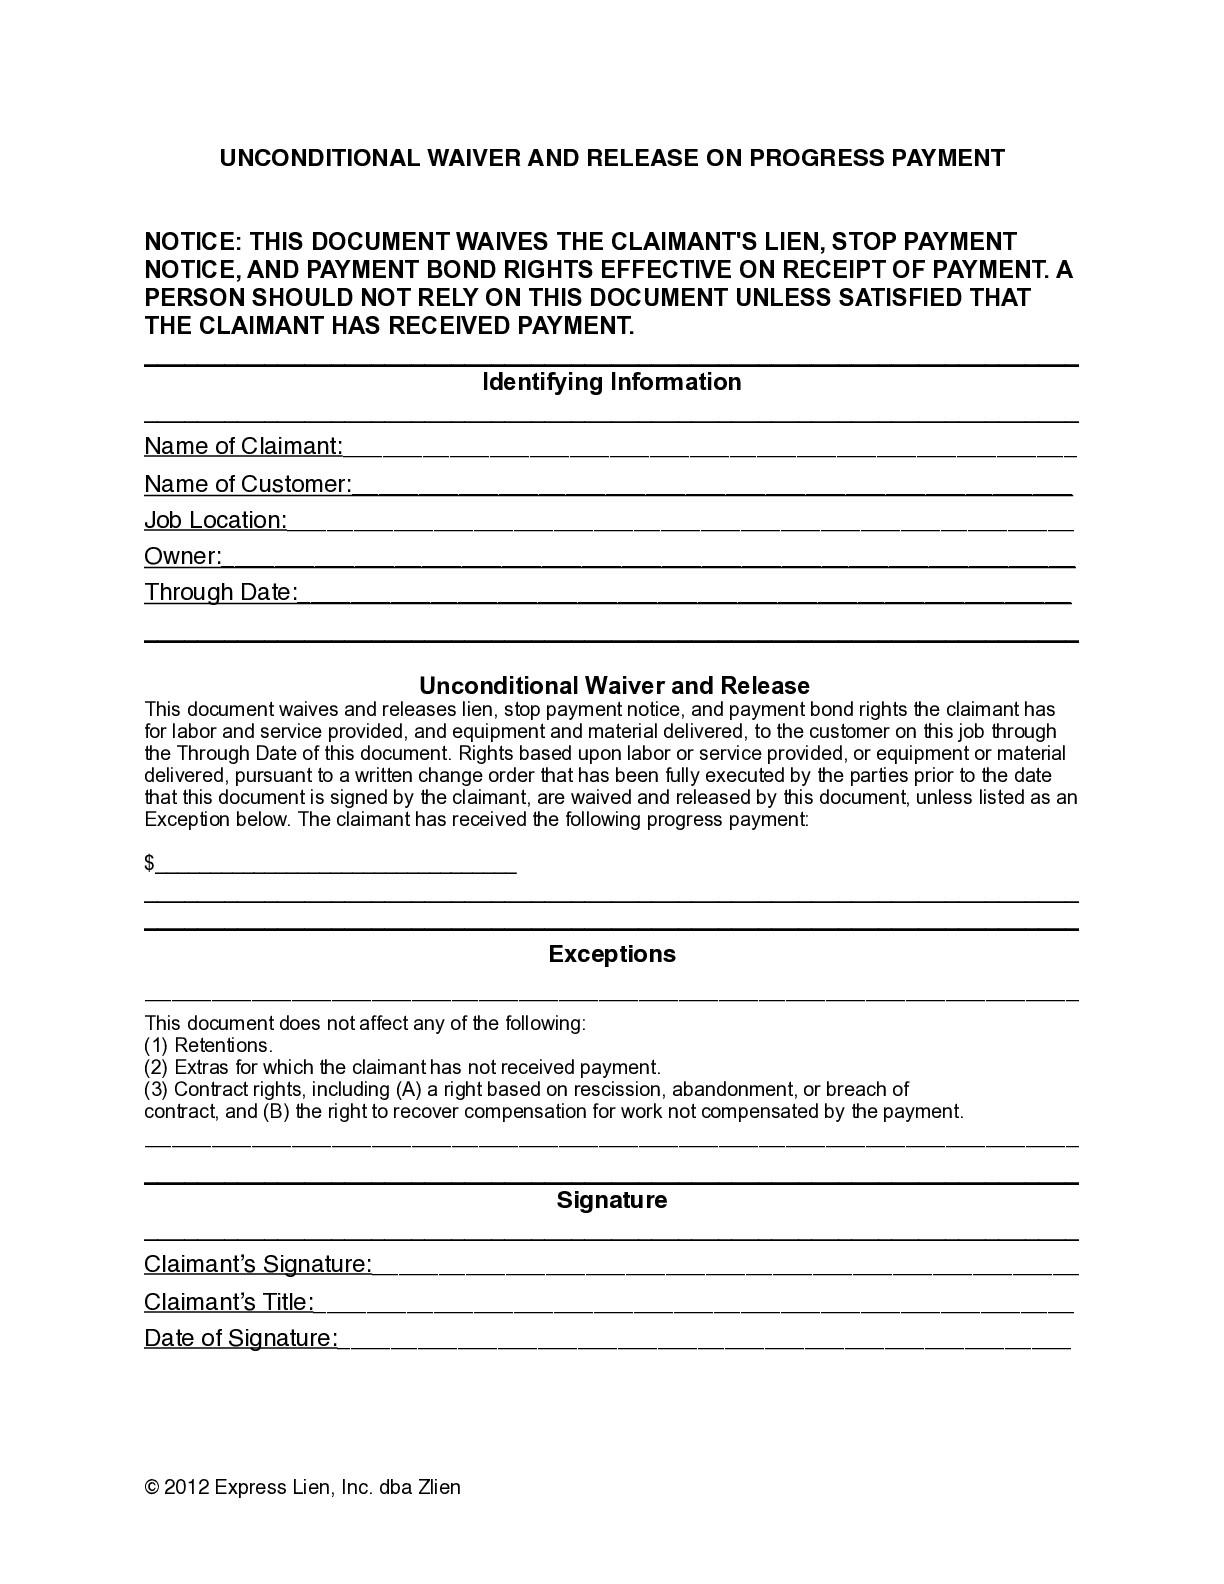 Louisiana Partial Unconditional Lien Waiver Form - free from